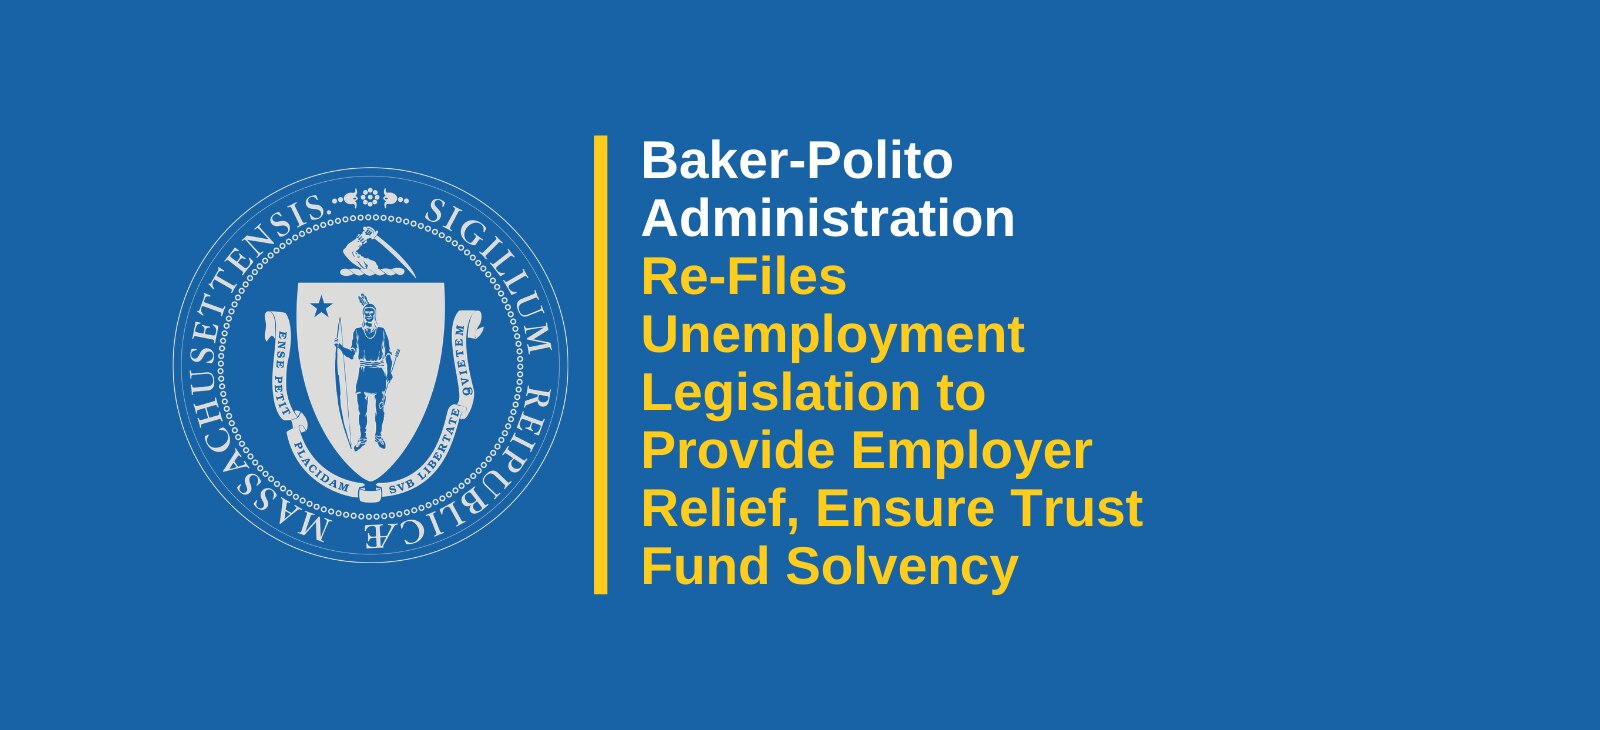 Baker-Polito Administration Re-Files Unemployment Legislation to Provide Employer Relief, Ensure Trust Fund Solvency